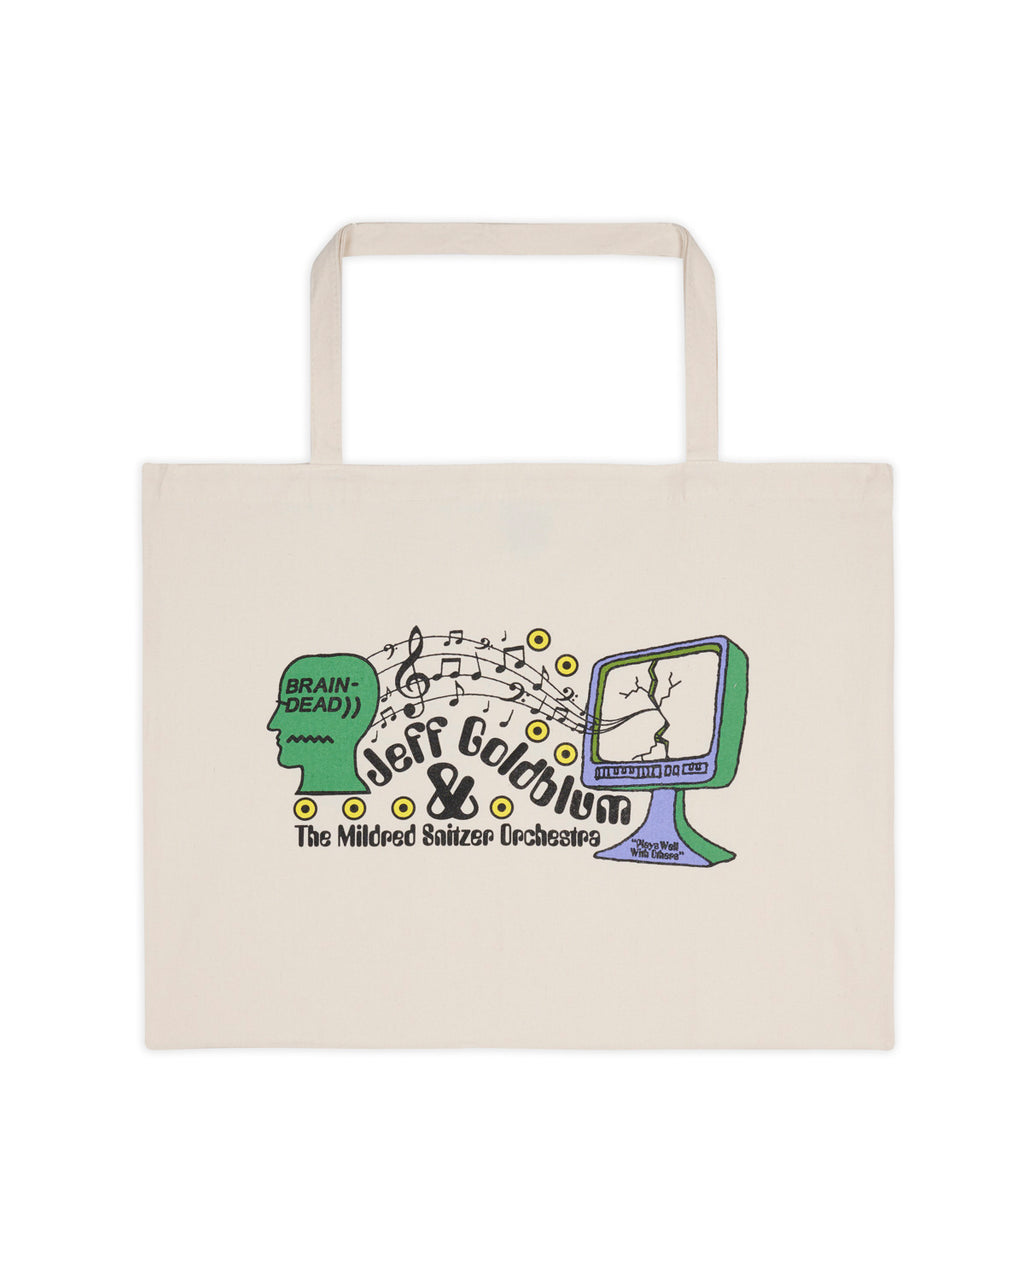 Brain Dead x Jeff Goldblum Plays Well With Others Tote Bag - Natural